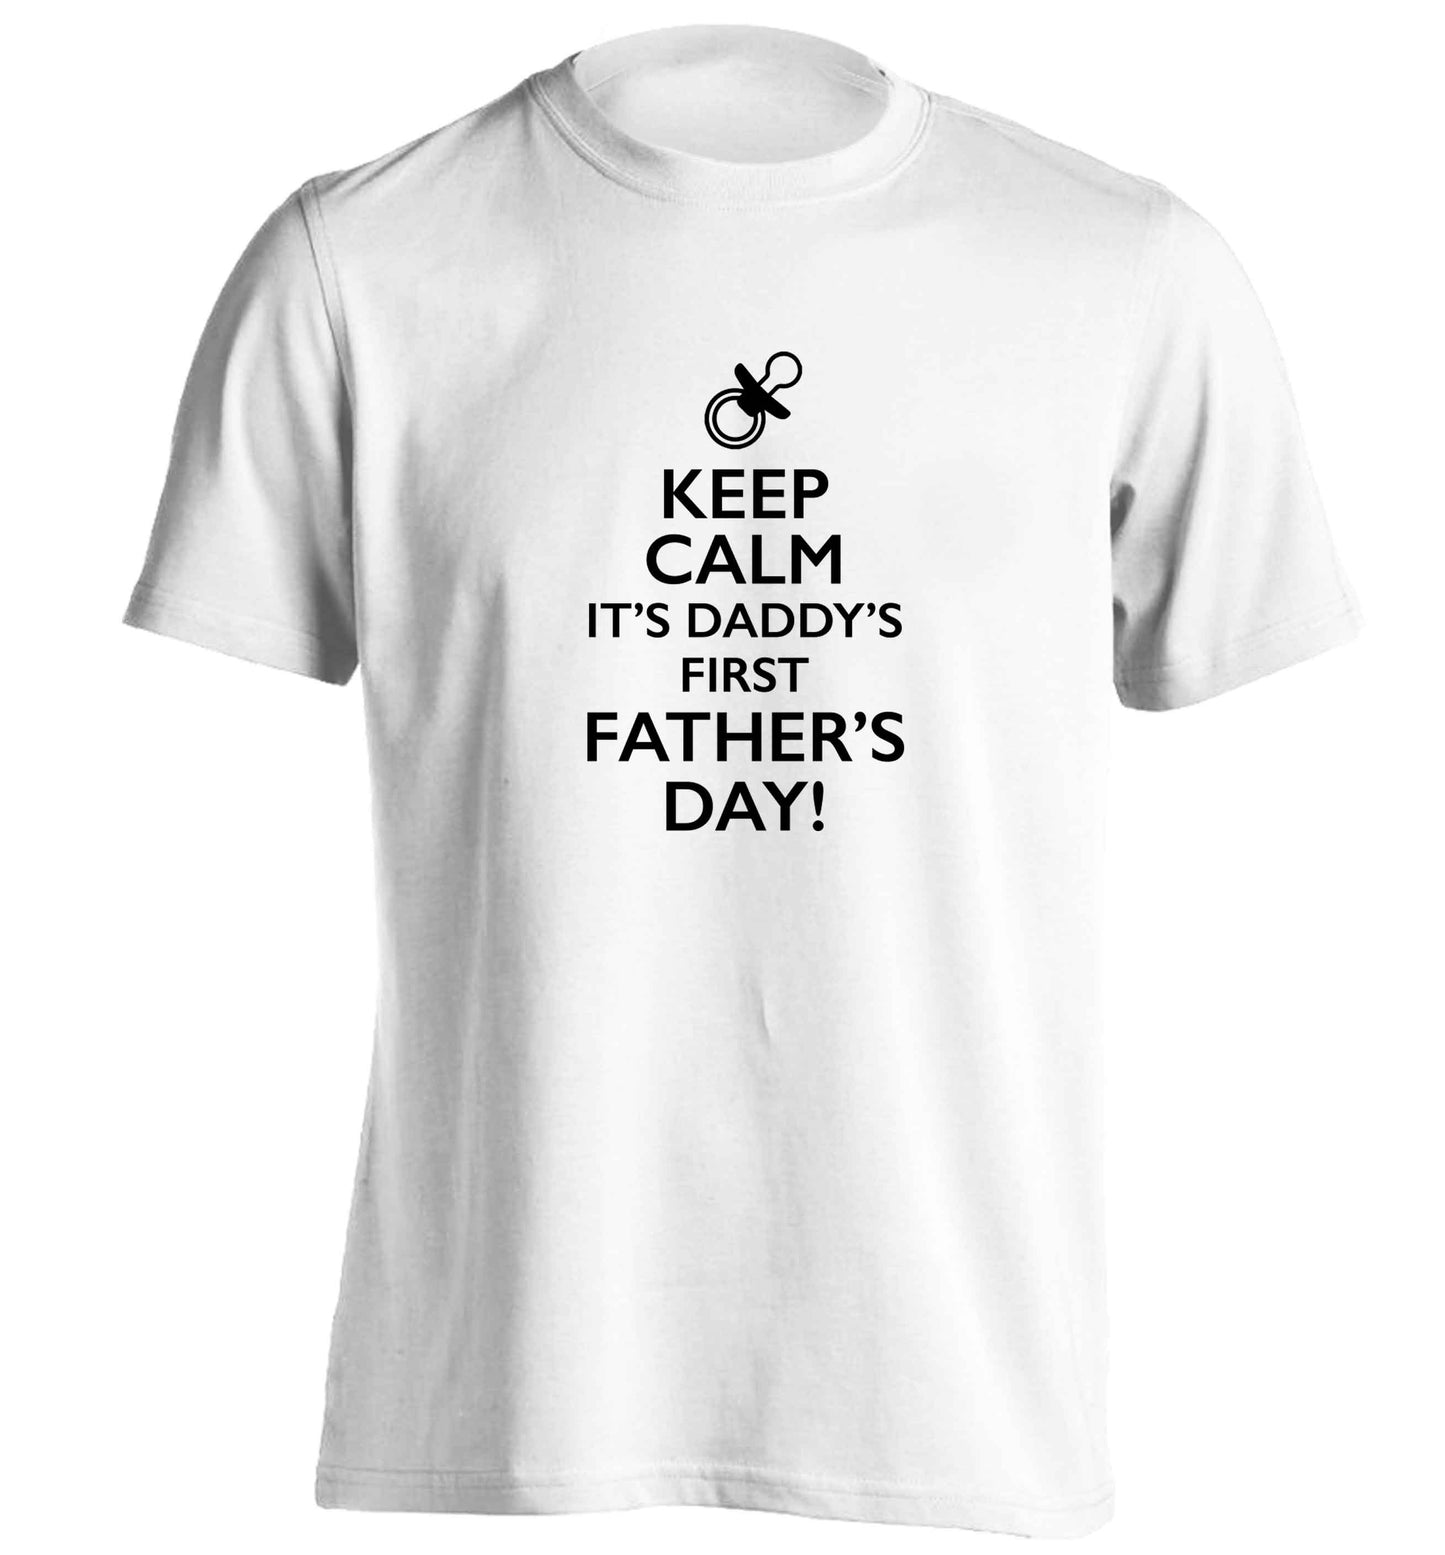 Keep calm it's daddys first father's day adults unisex white Tshirt 2XL